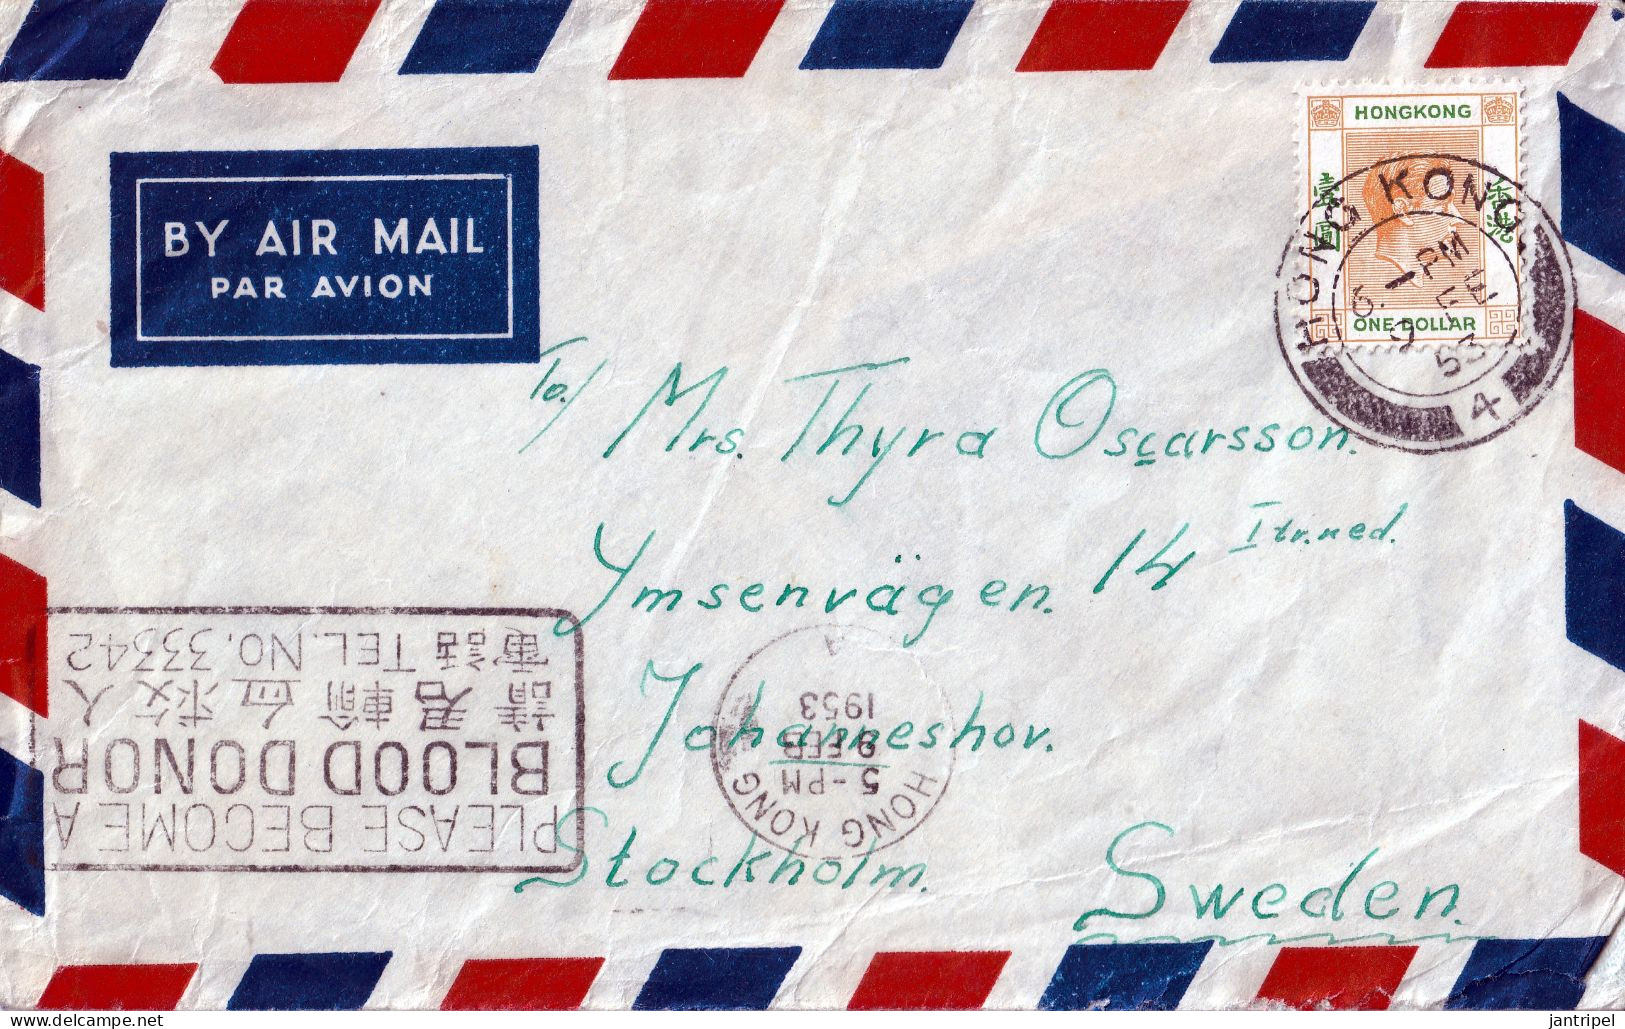 HONGKONG1953 KGVI COVER To SWEDEN  FULL STROKE PROMOTION MARK "PLEASE BECOME A BLOOD DONOR" - Briefe U. Dokumente